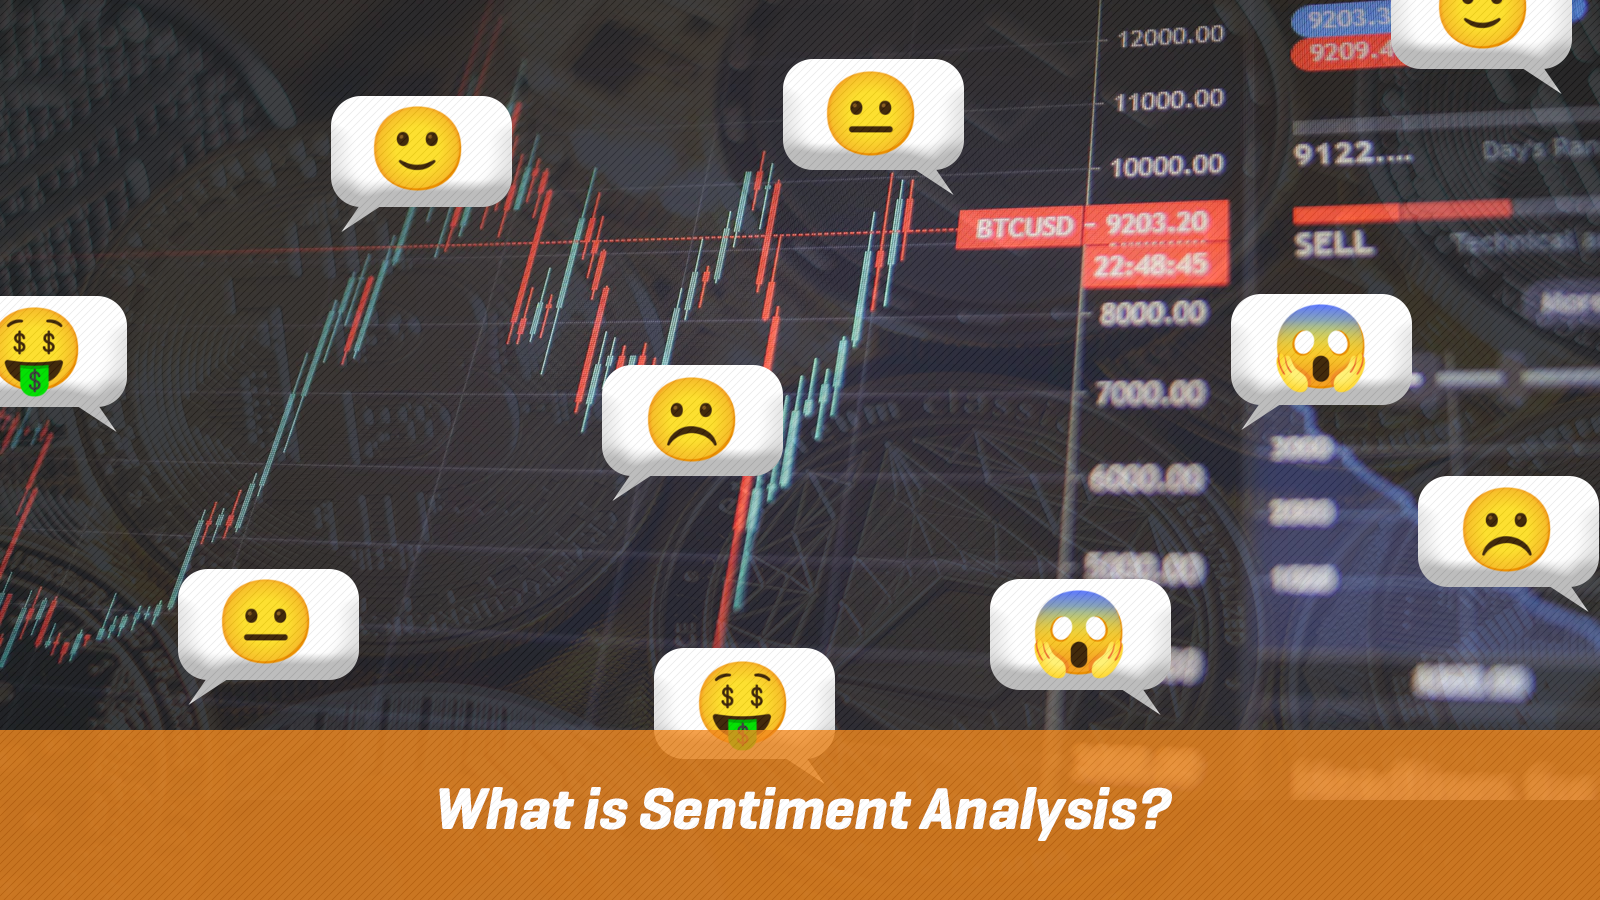 Sentiment Analysis for Cryptocurrencies